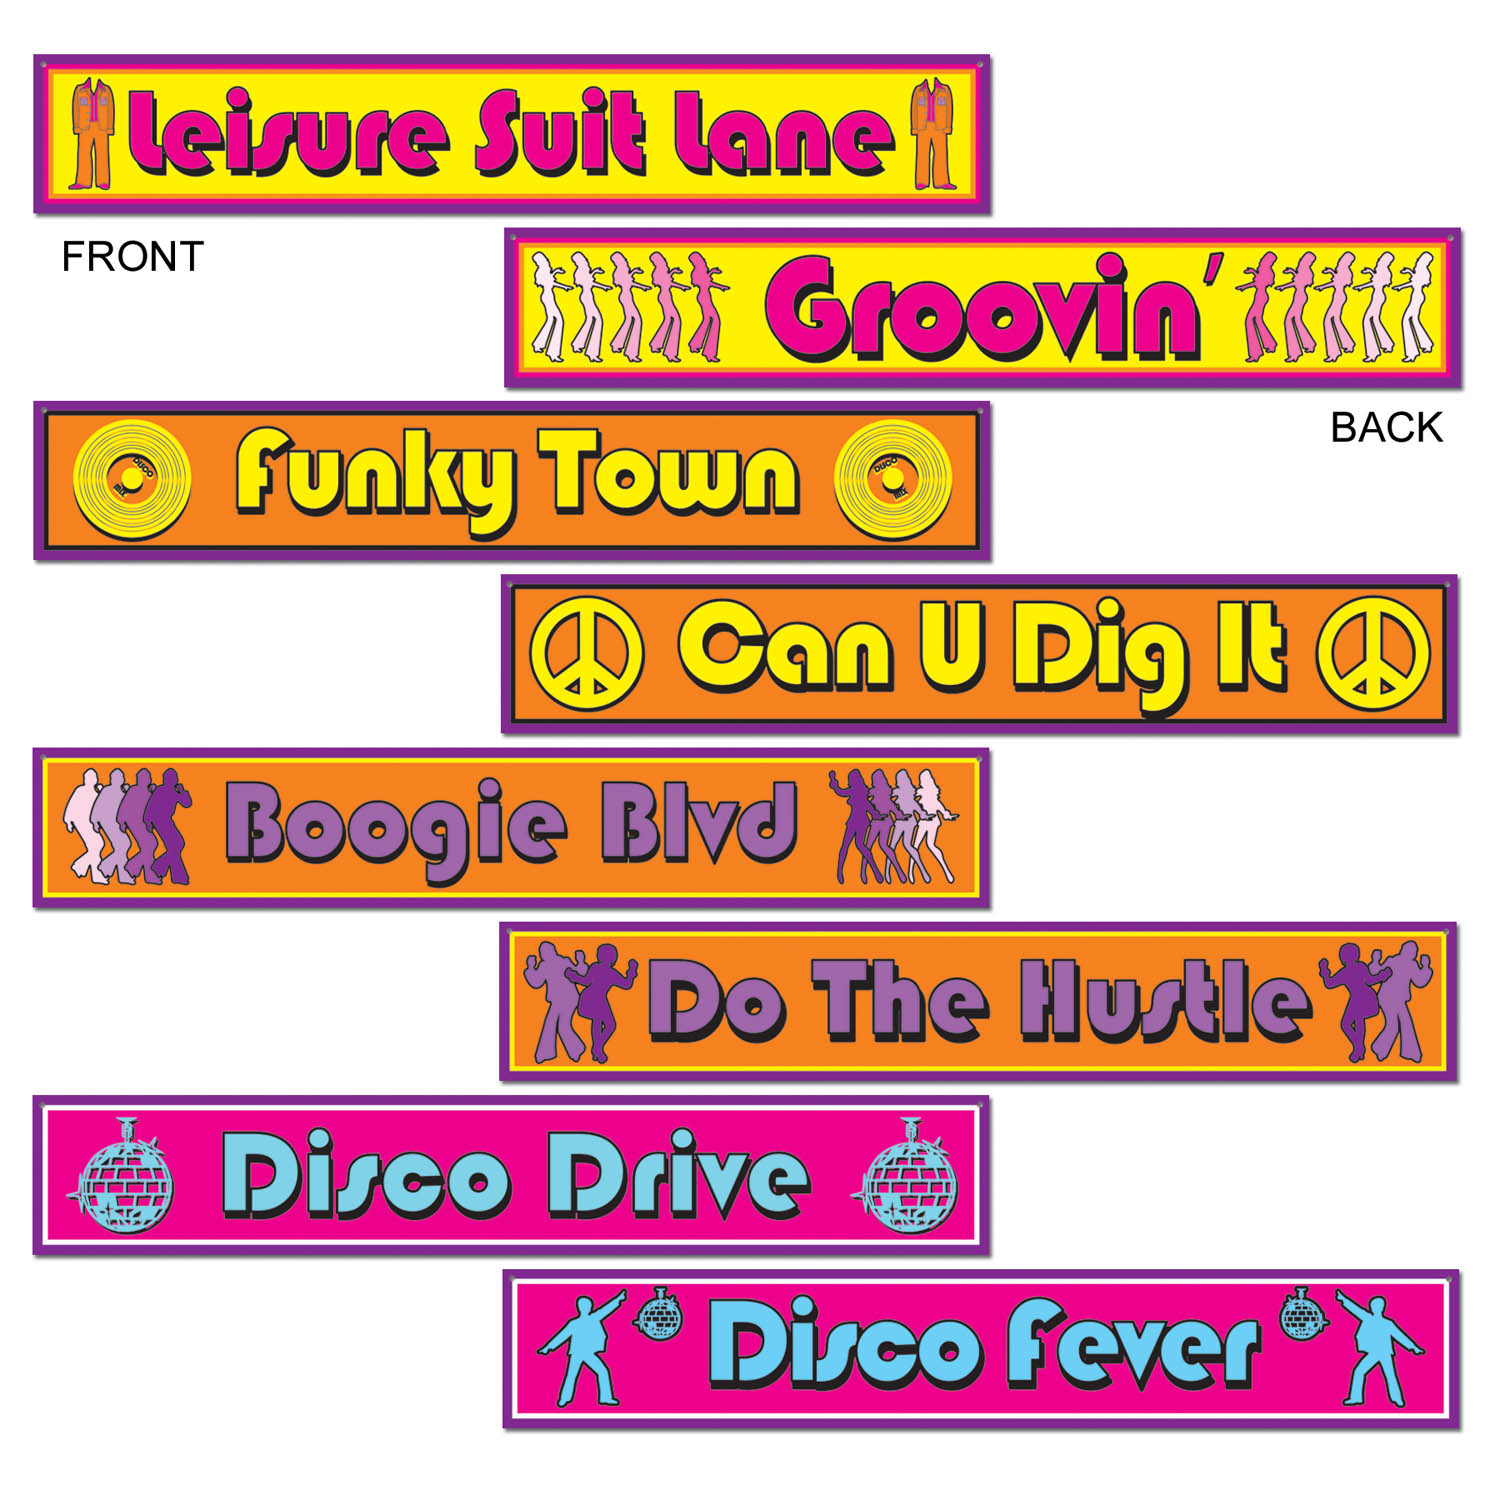 1970s style paper signs with disco era sayings